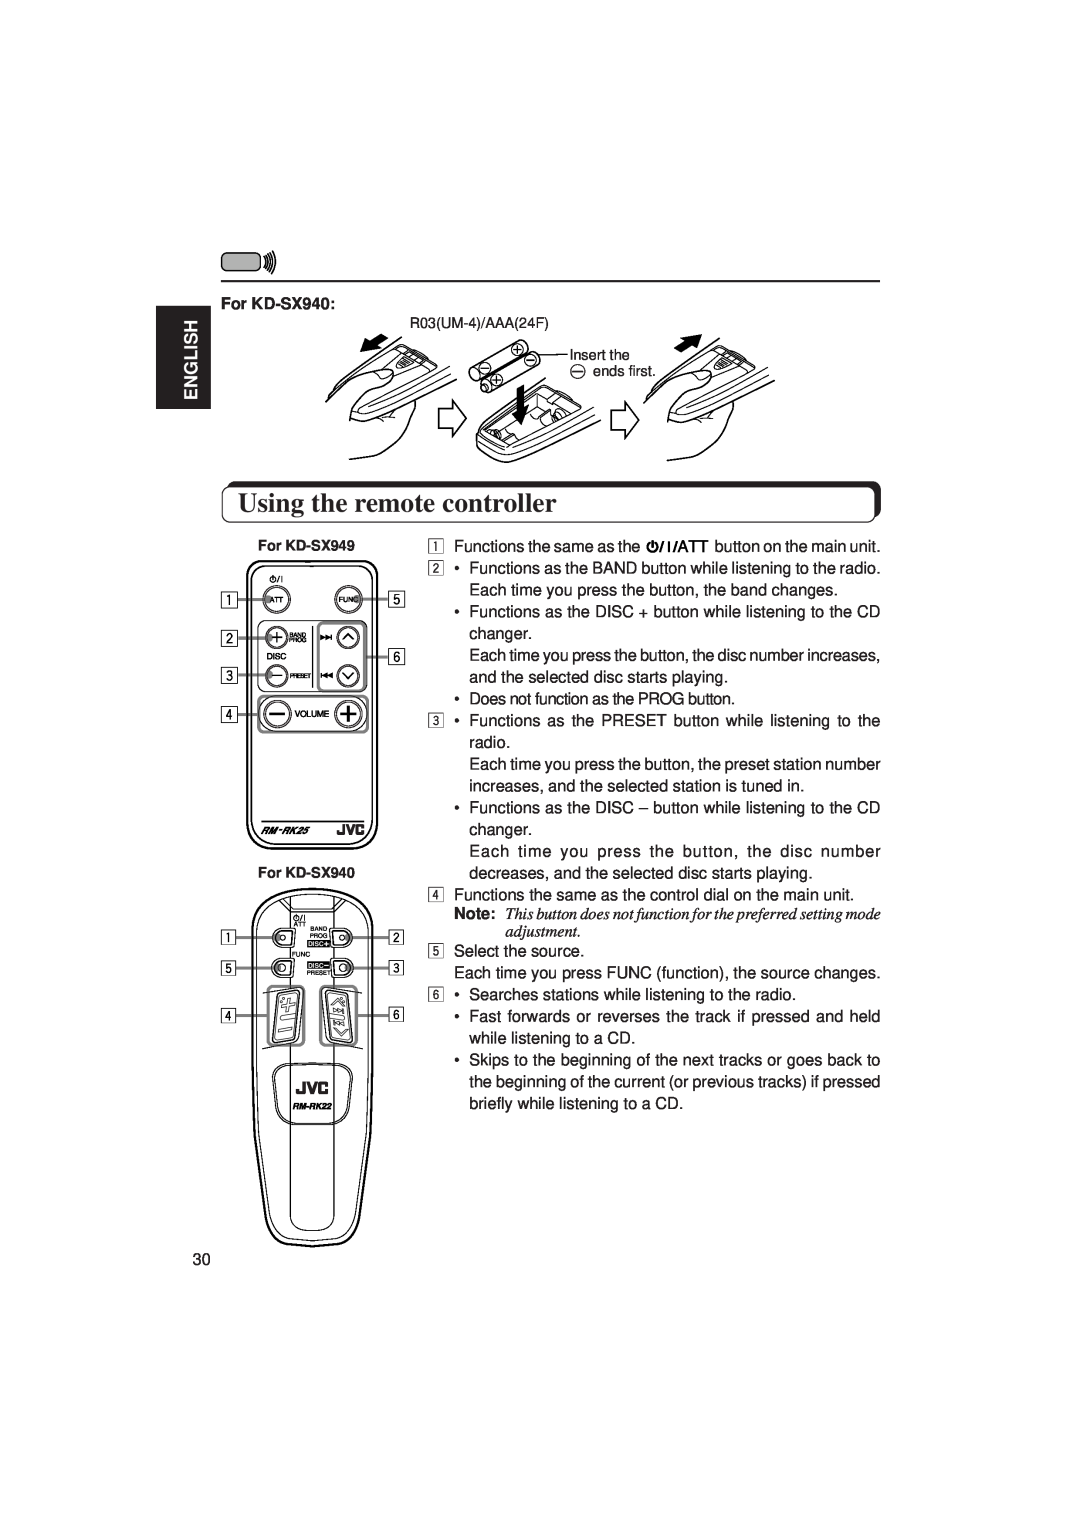 JVC KD-SX949 manual Using the remote controller, English, 1 2, For KD-SX940 